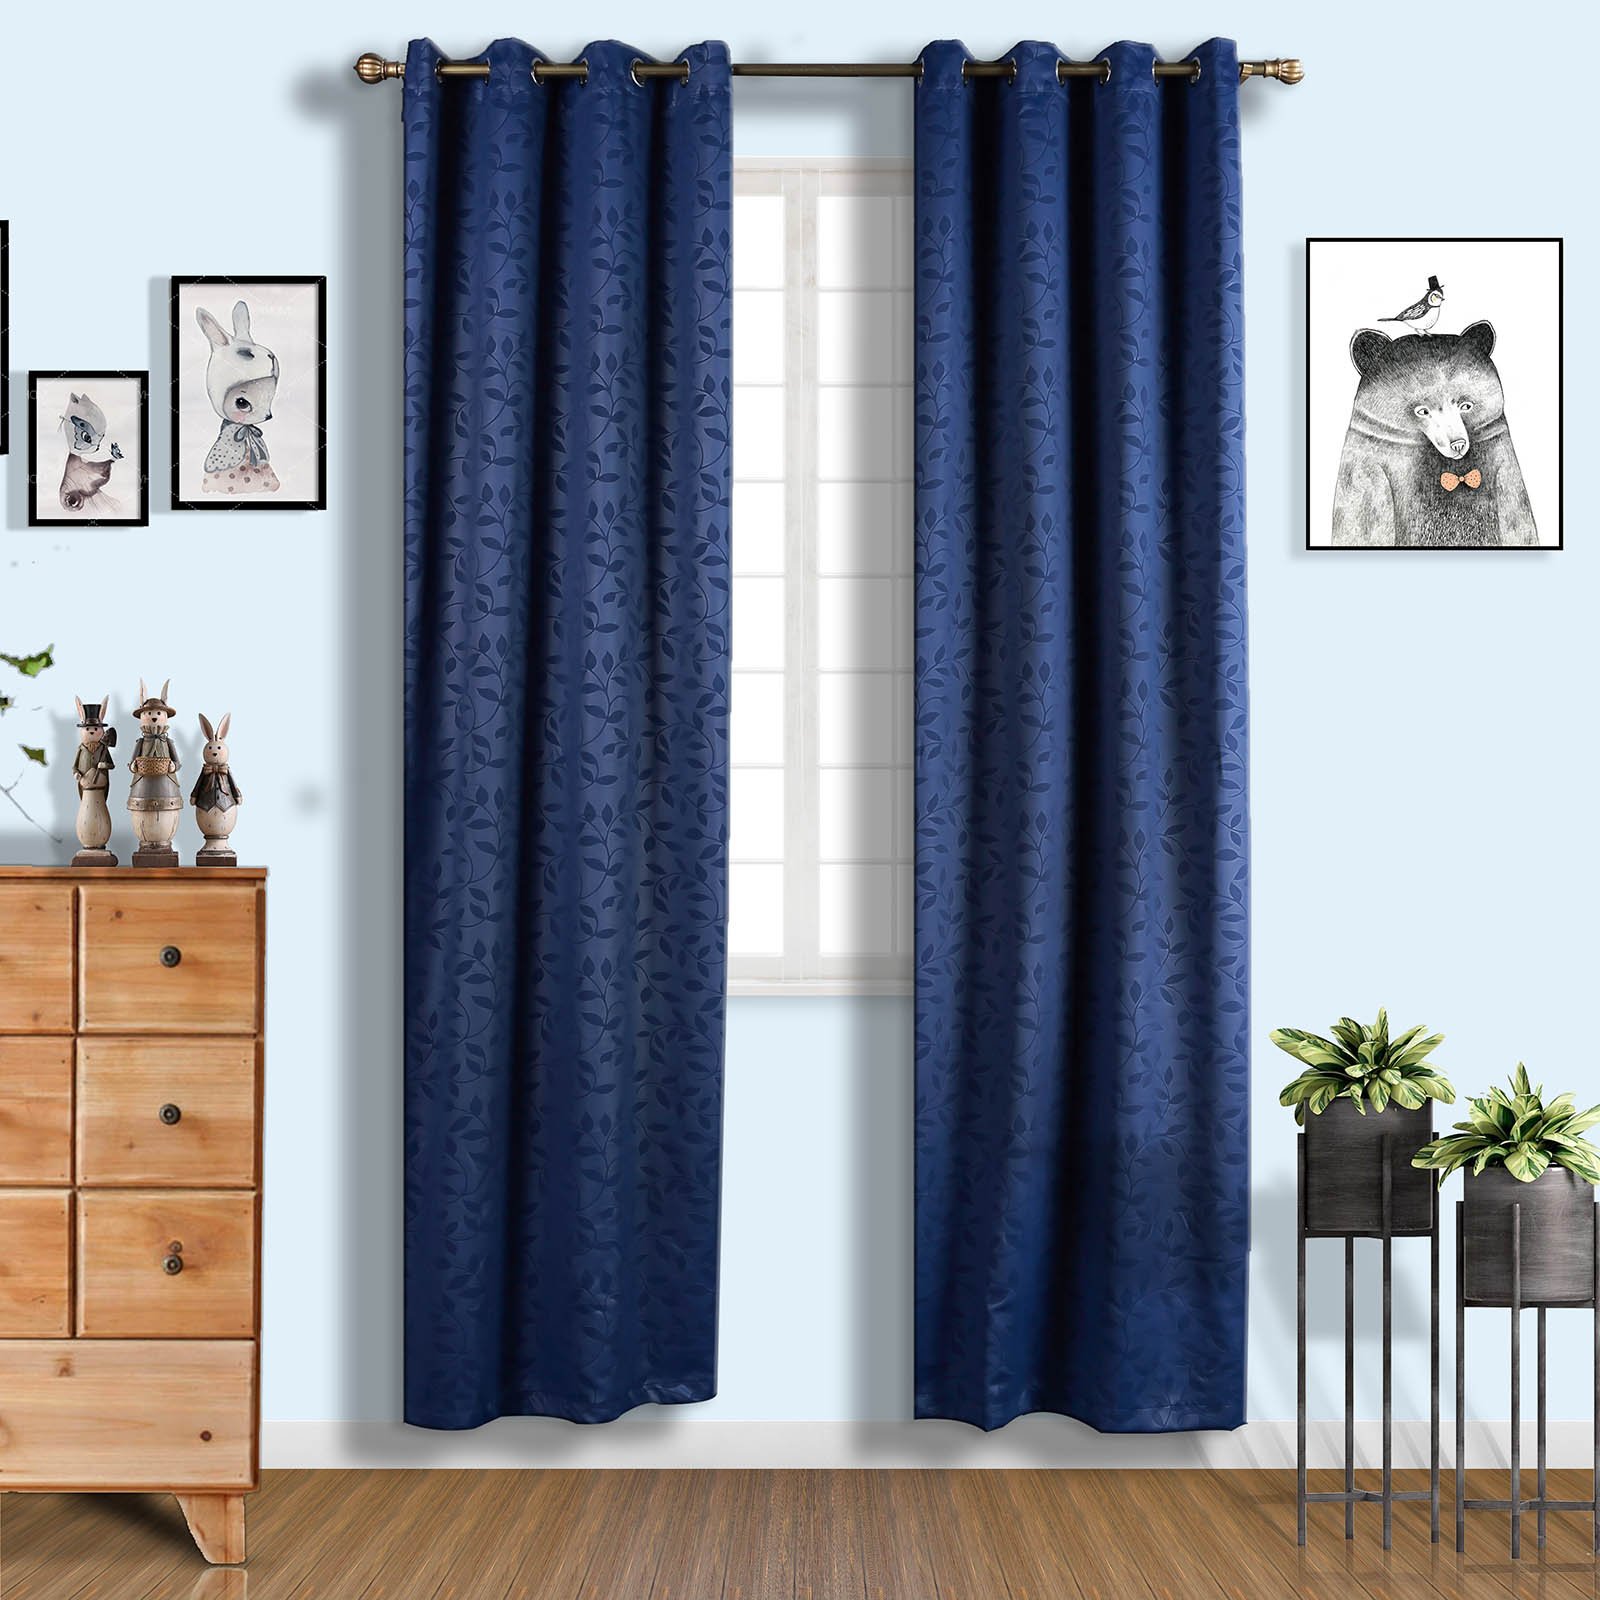 Navy Blue Soundproof Curtains | 2 Packs Embossed Curtains | 52 x 108 Inch Blackout Curtains | Room Darkening Curtains With Grommets - image 1 of 1